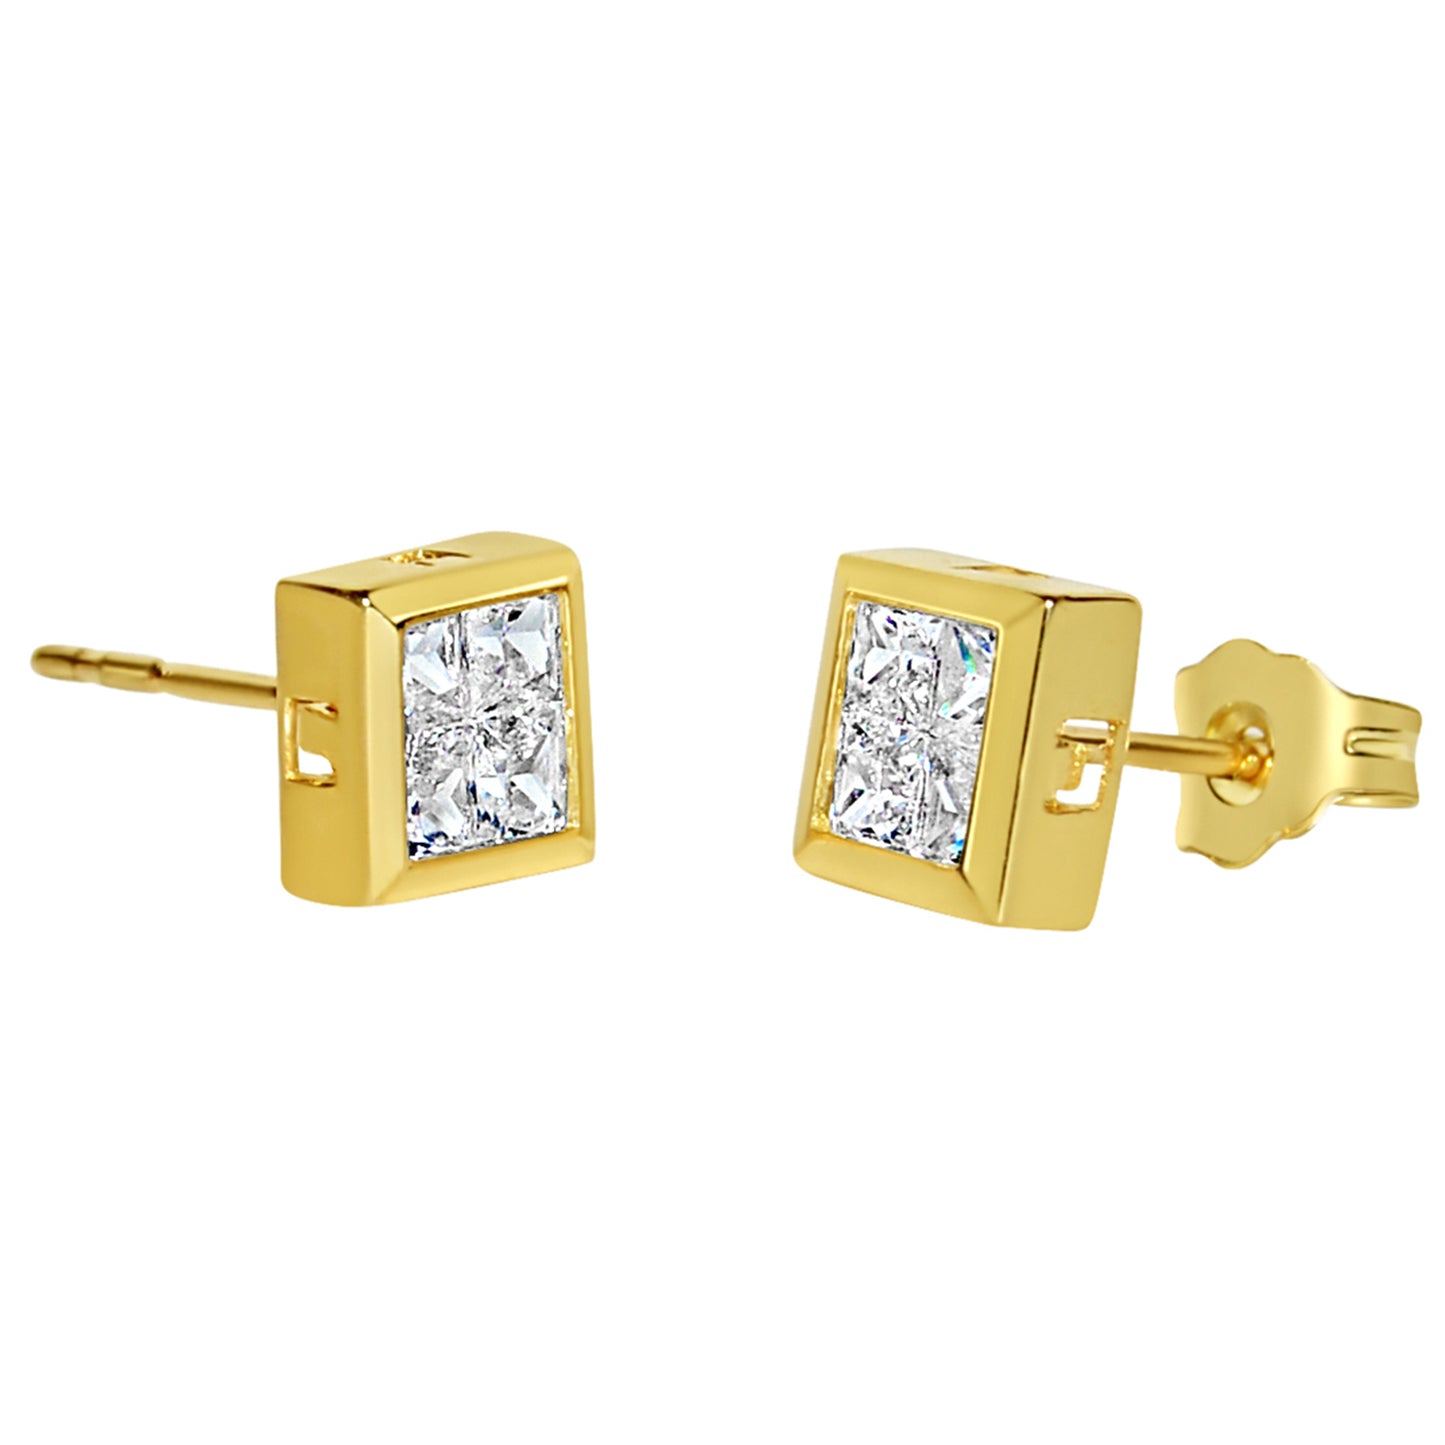 14k Yellow Gold 6mm Composite Invisible-Set Cubic Zirconia Square Stud Earrings